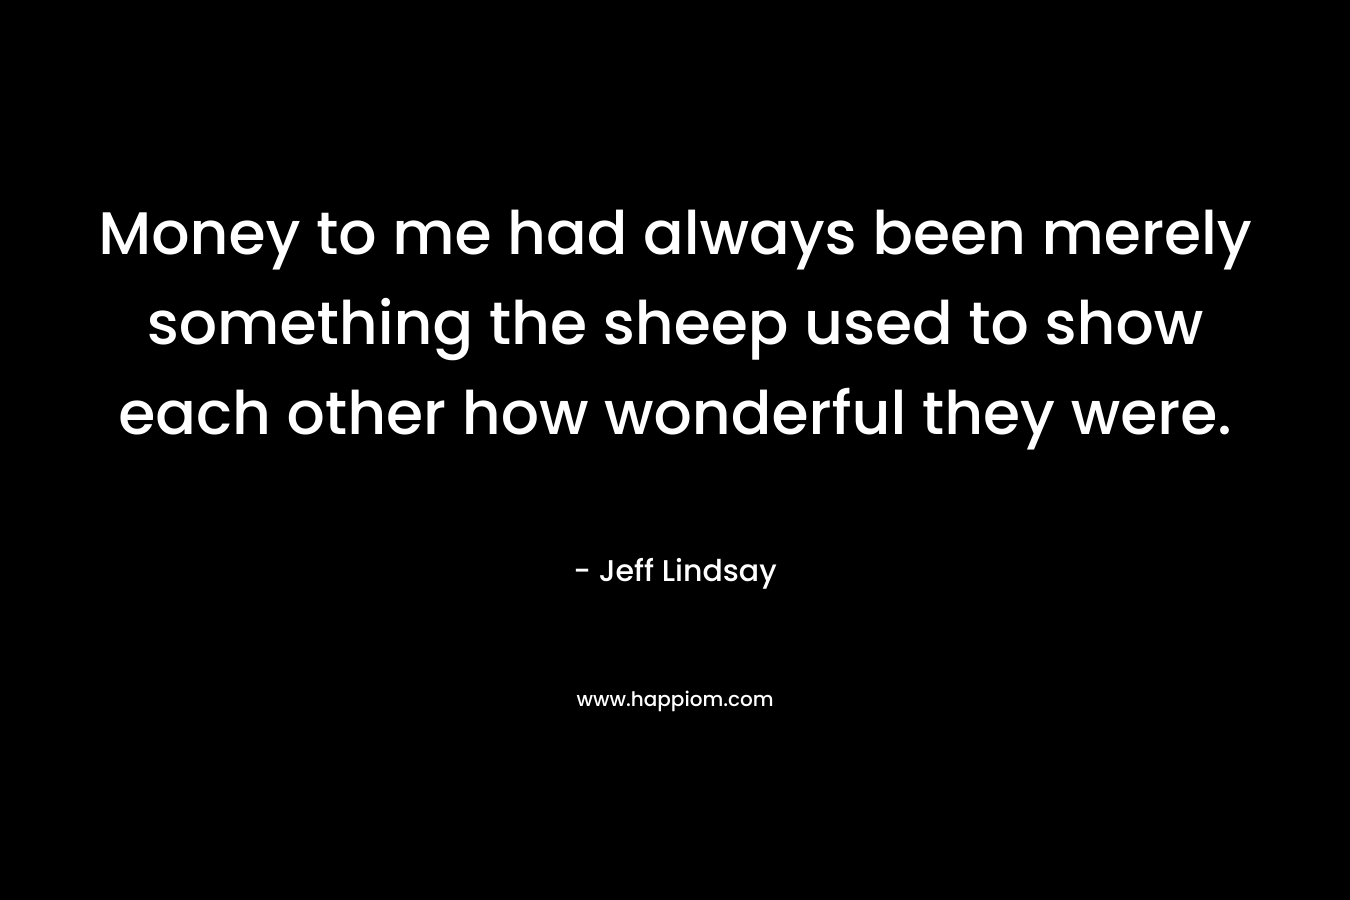 Money to me had always been merely something the sheep used to show each other how wonderful they were.